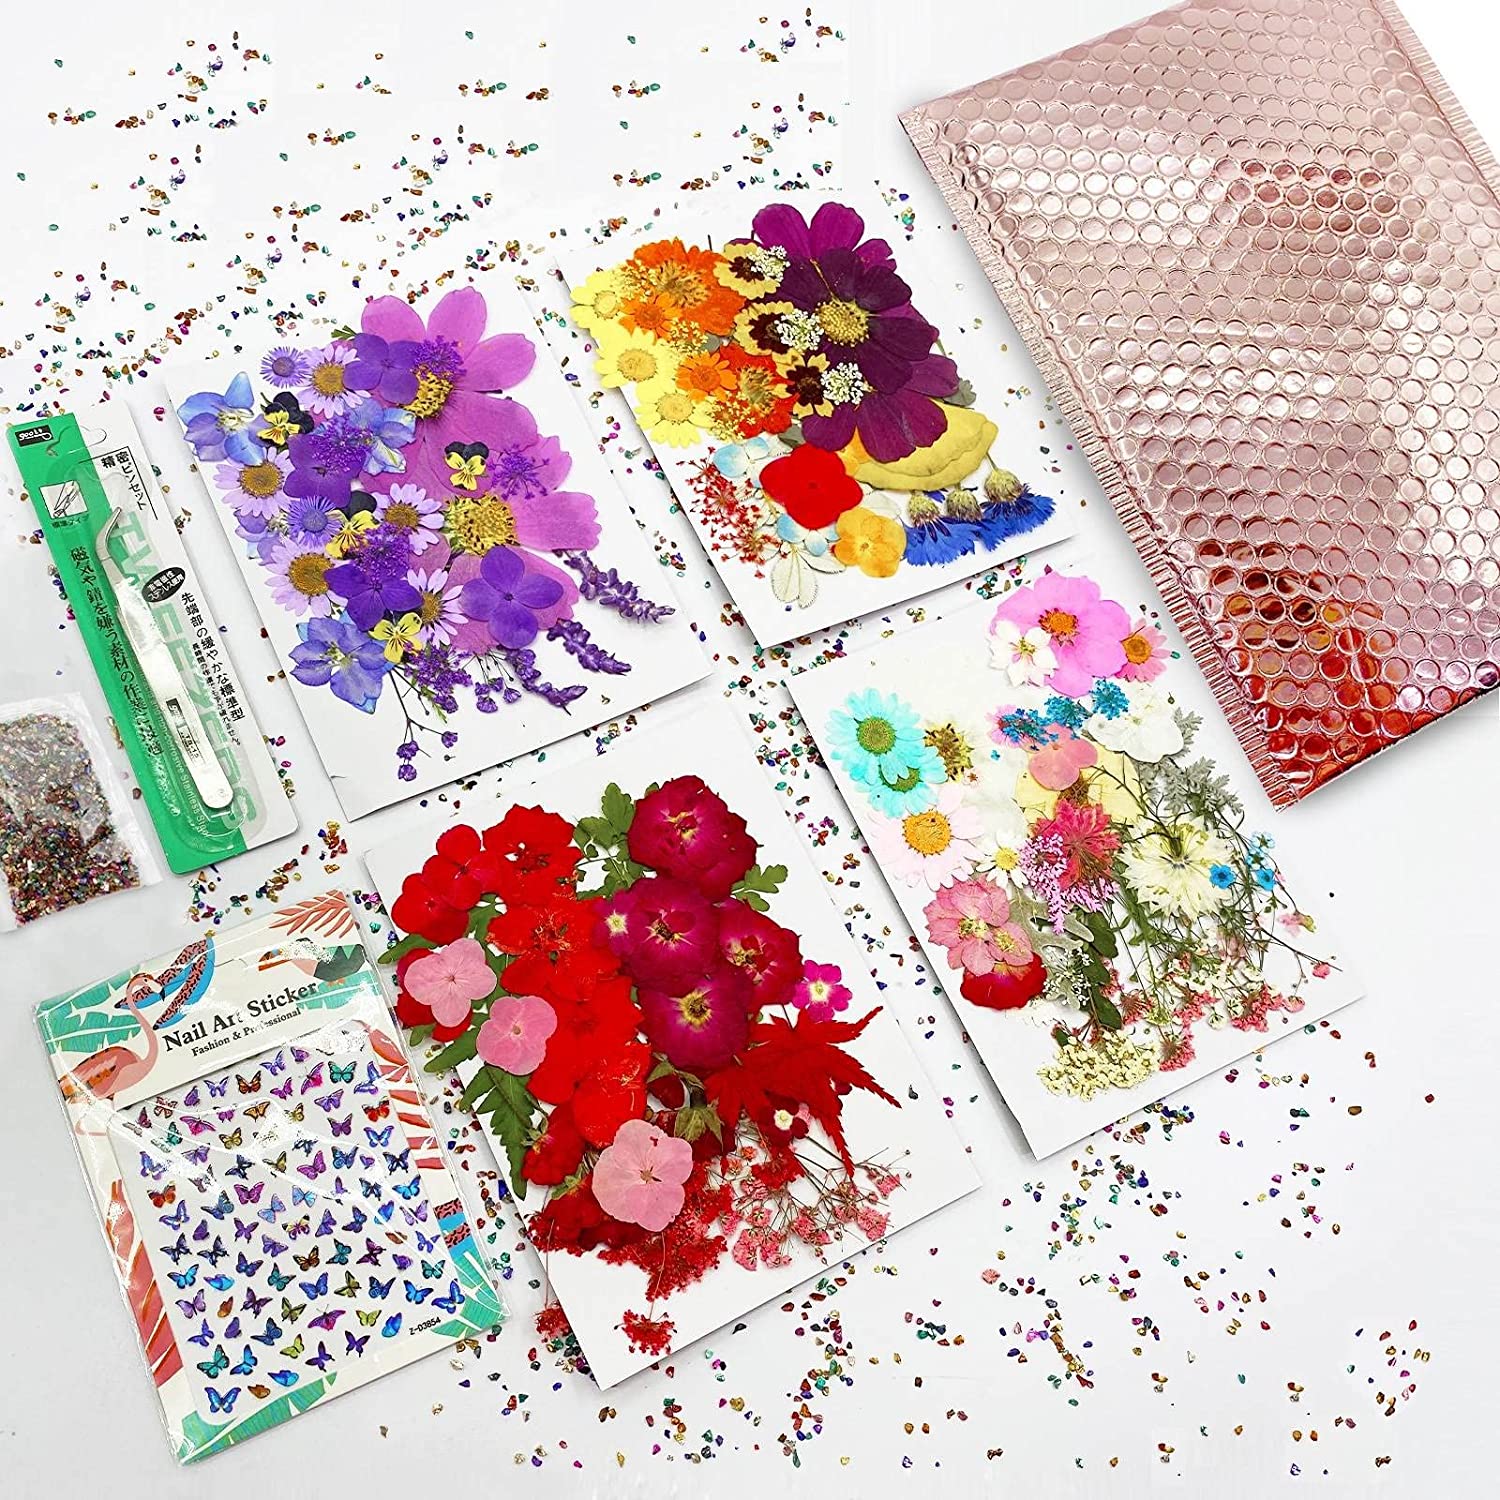 Dried Flowers for Resin Molds Variety of Dried Pressed Flowers for Candle  Making Bundle Dry Flowers for Decoration and Scrapbooking Supplies DIY Home